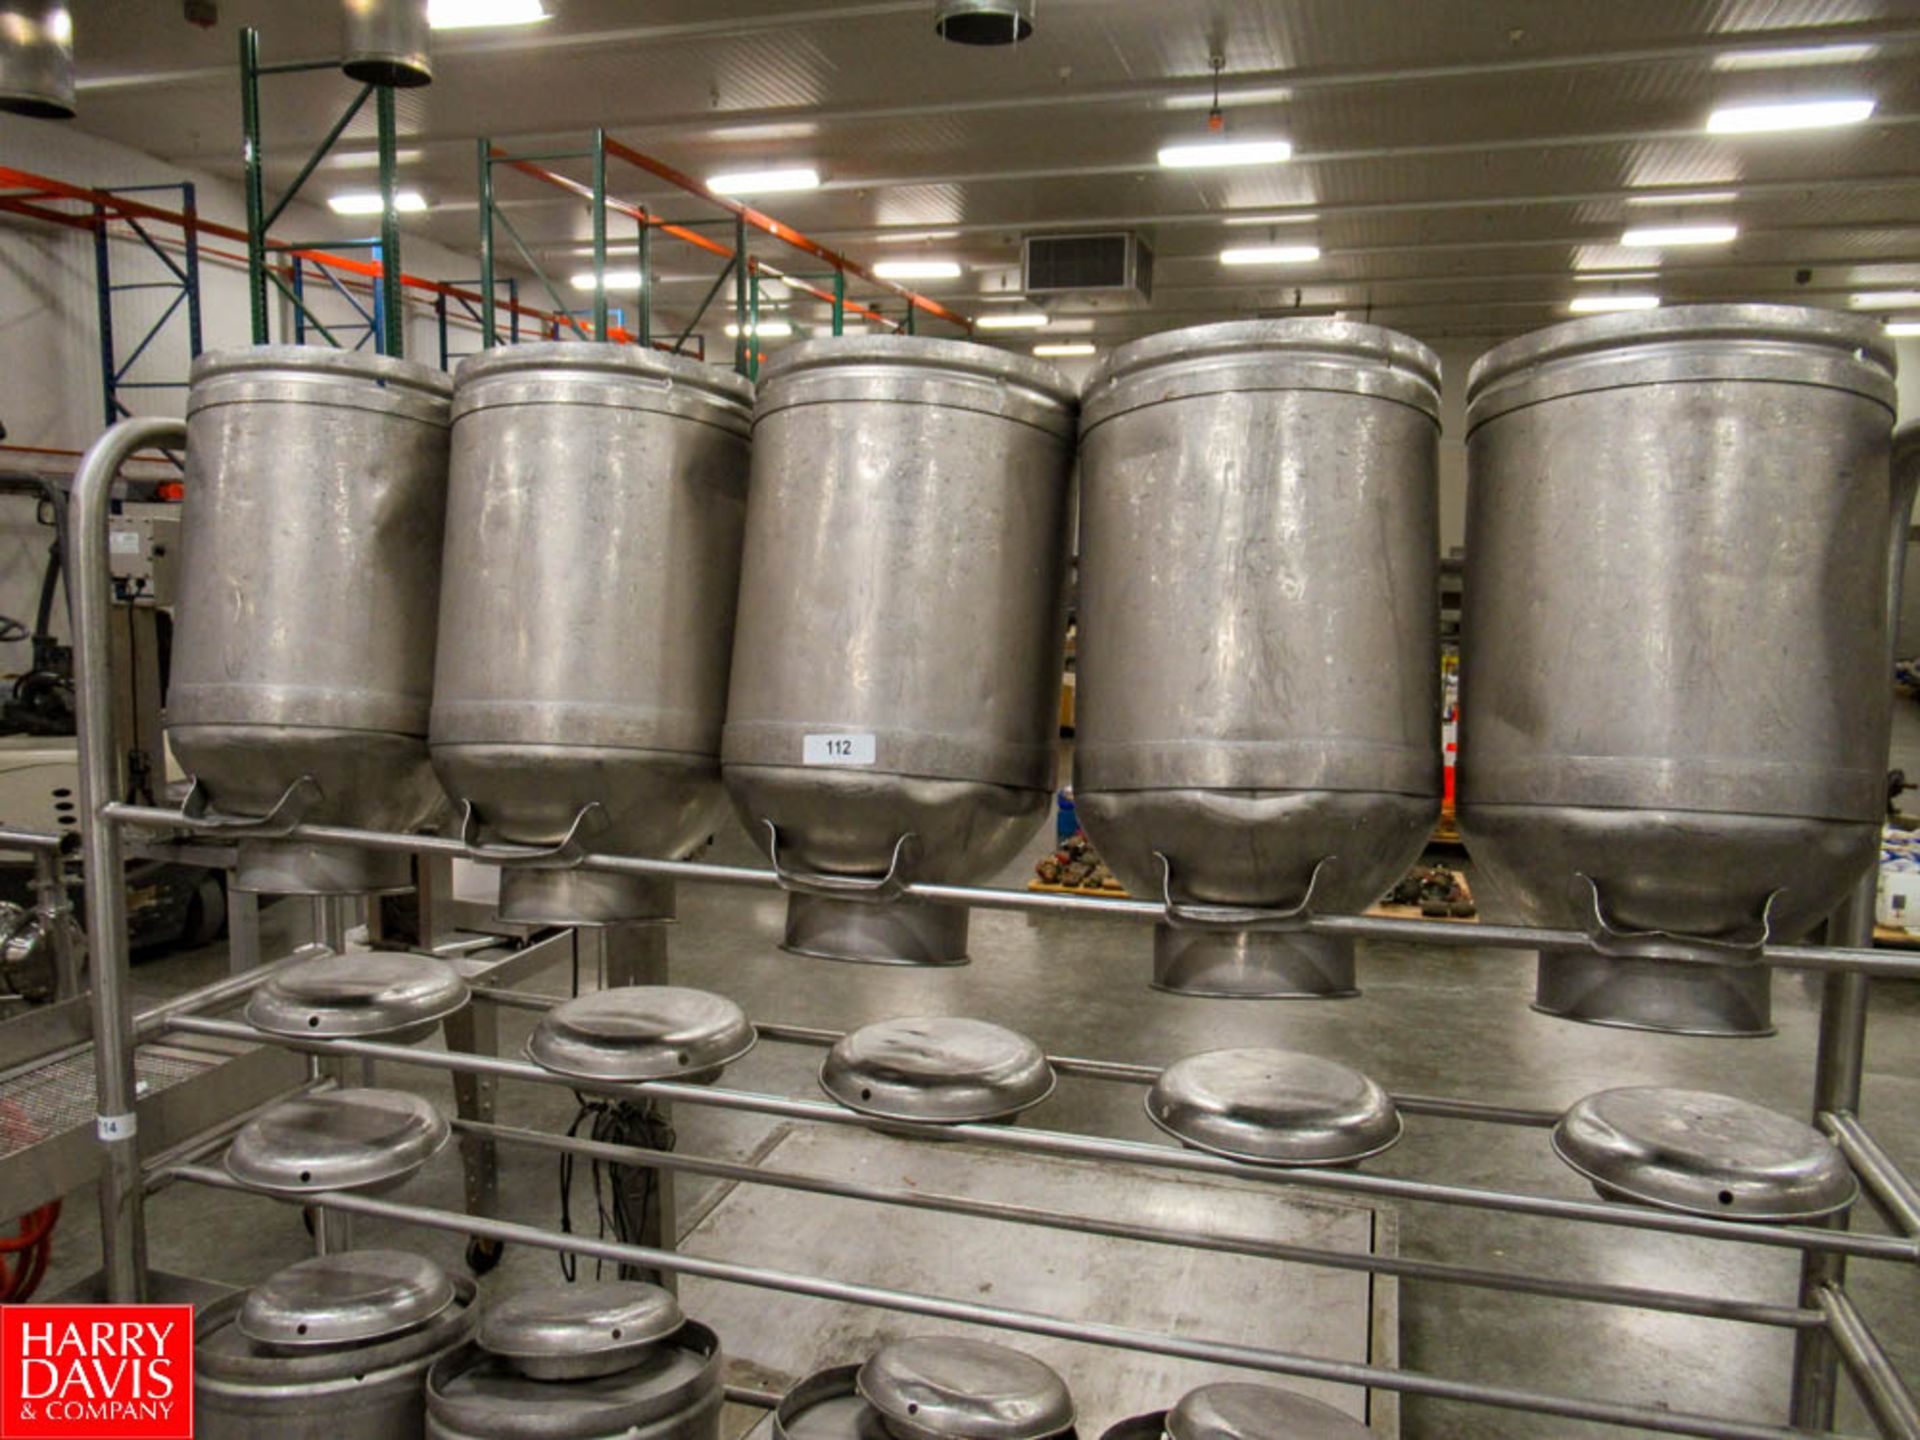 5 Gal Milk Cans, Located In Dry Storage - Rigging Fee: $ 50